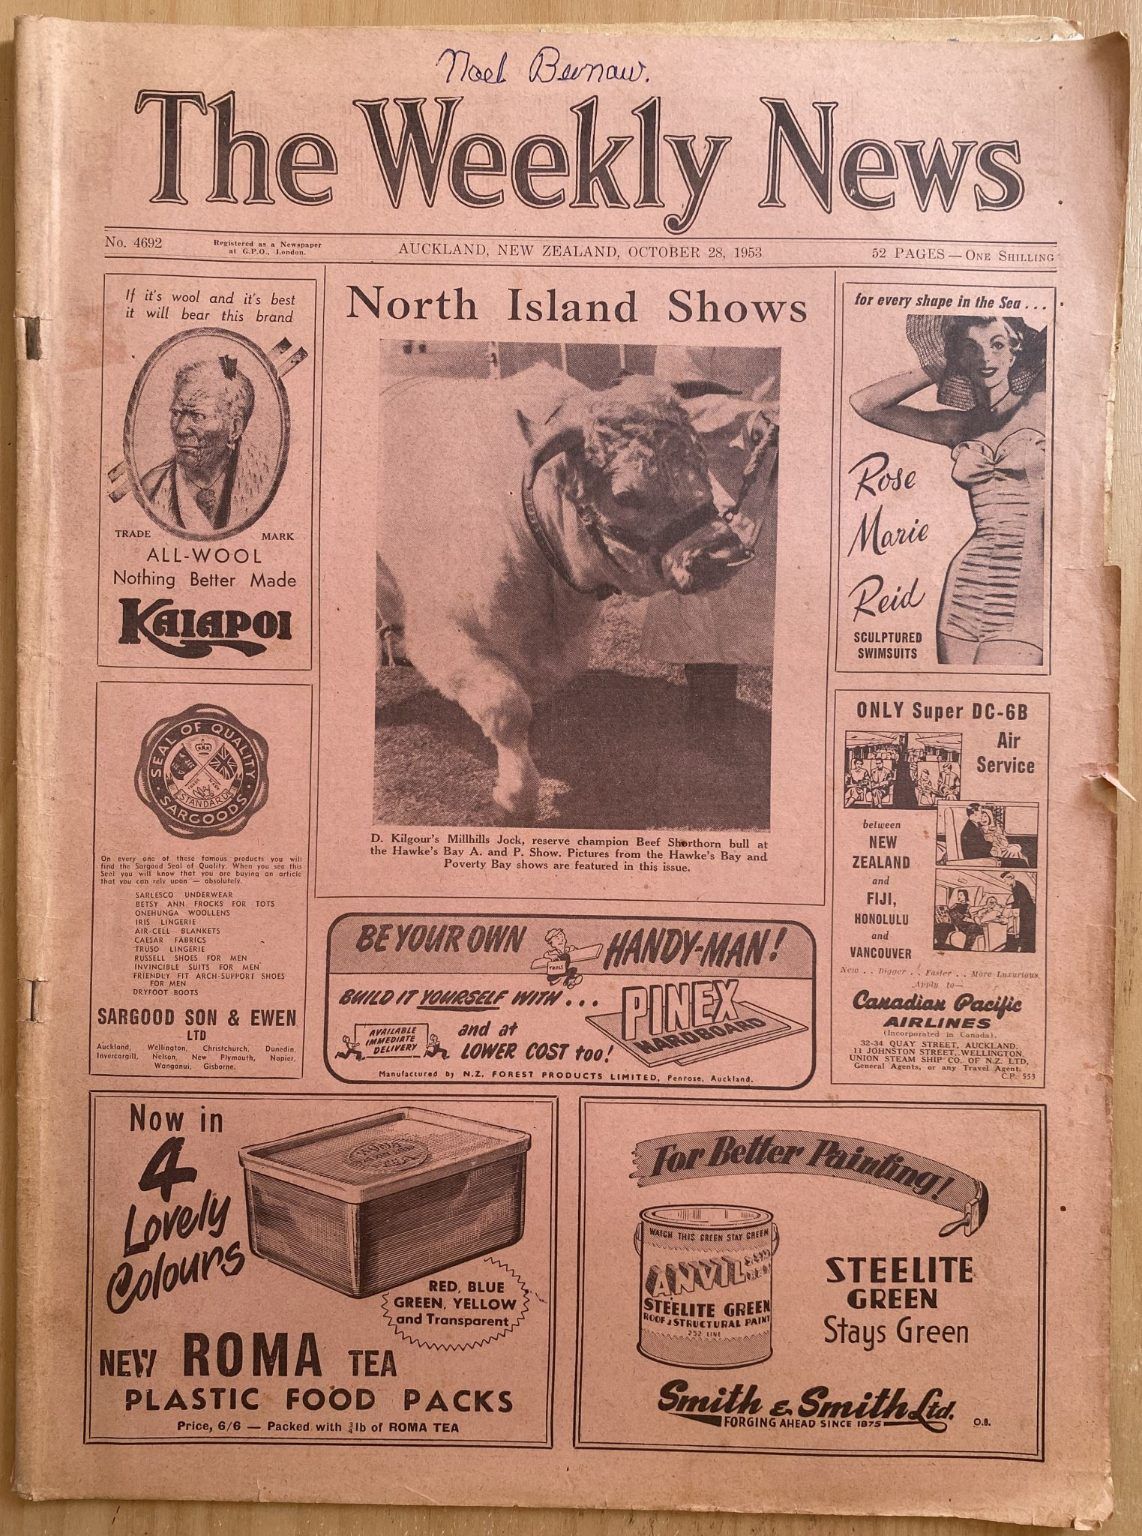 OLD NEWSPAPER: The Weekly News - No. 4692, 28 October 1953